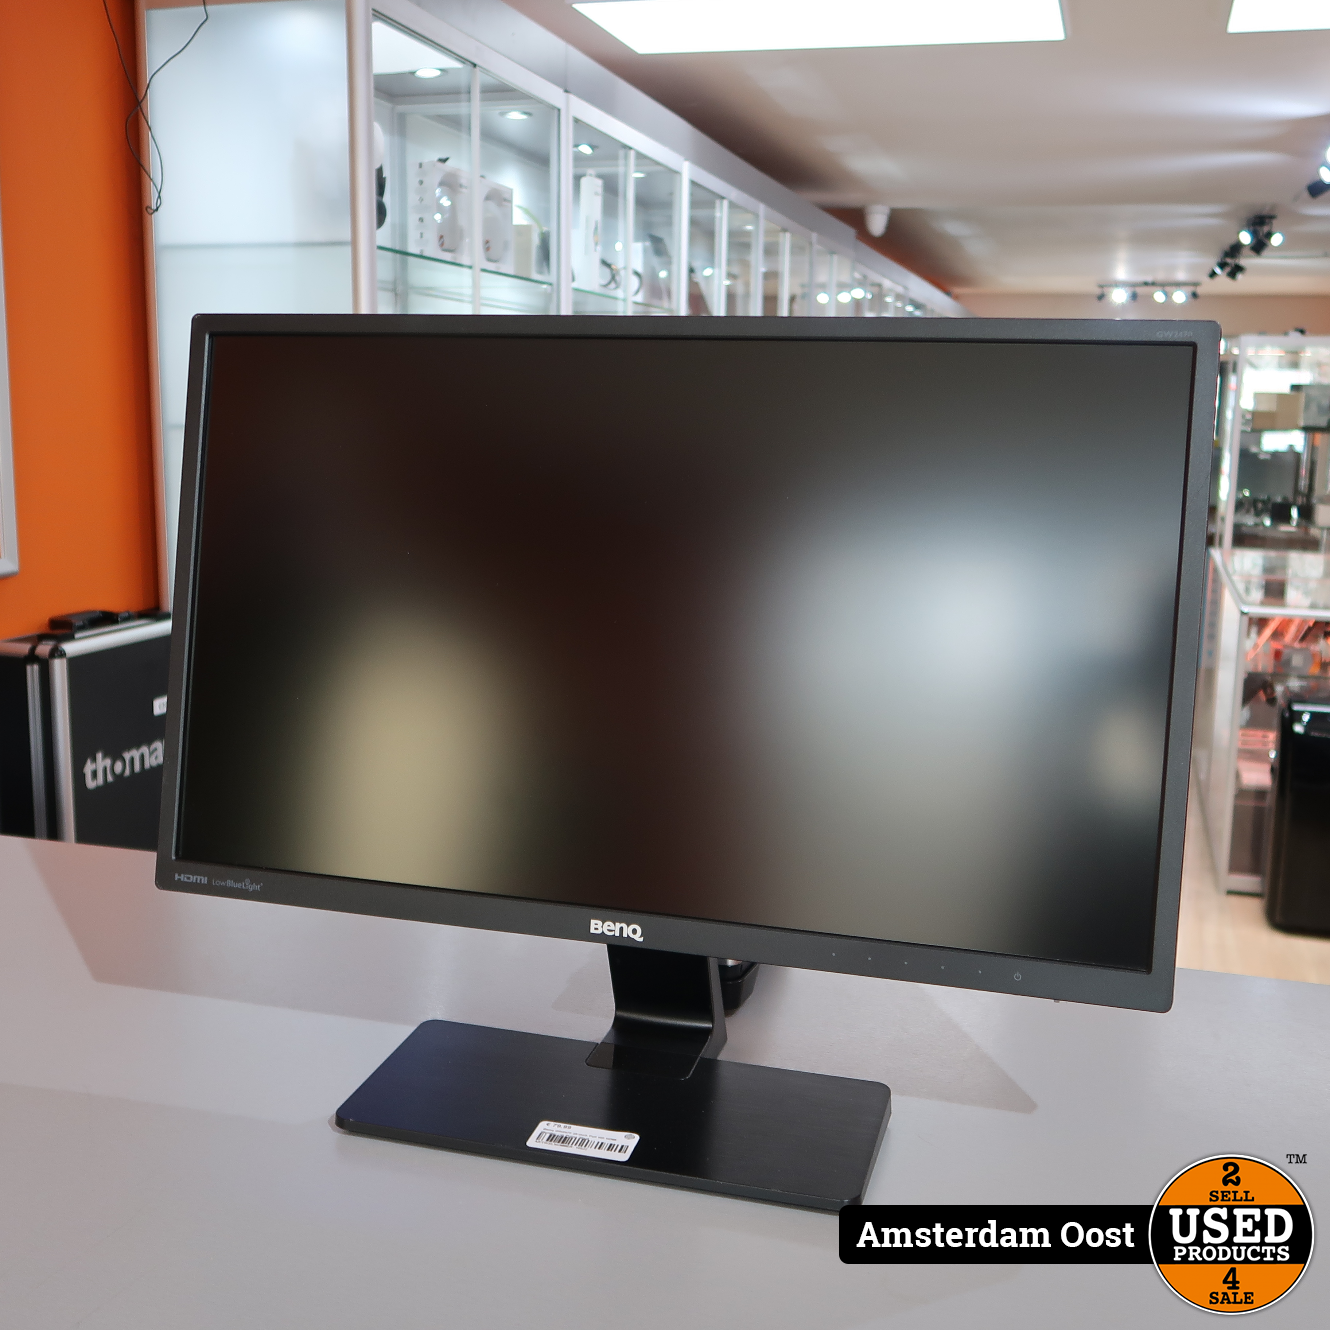 Benq 24-inch Full HD HDMI Monitor in Prima Staat - Used Products Amsterdam Oost